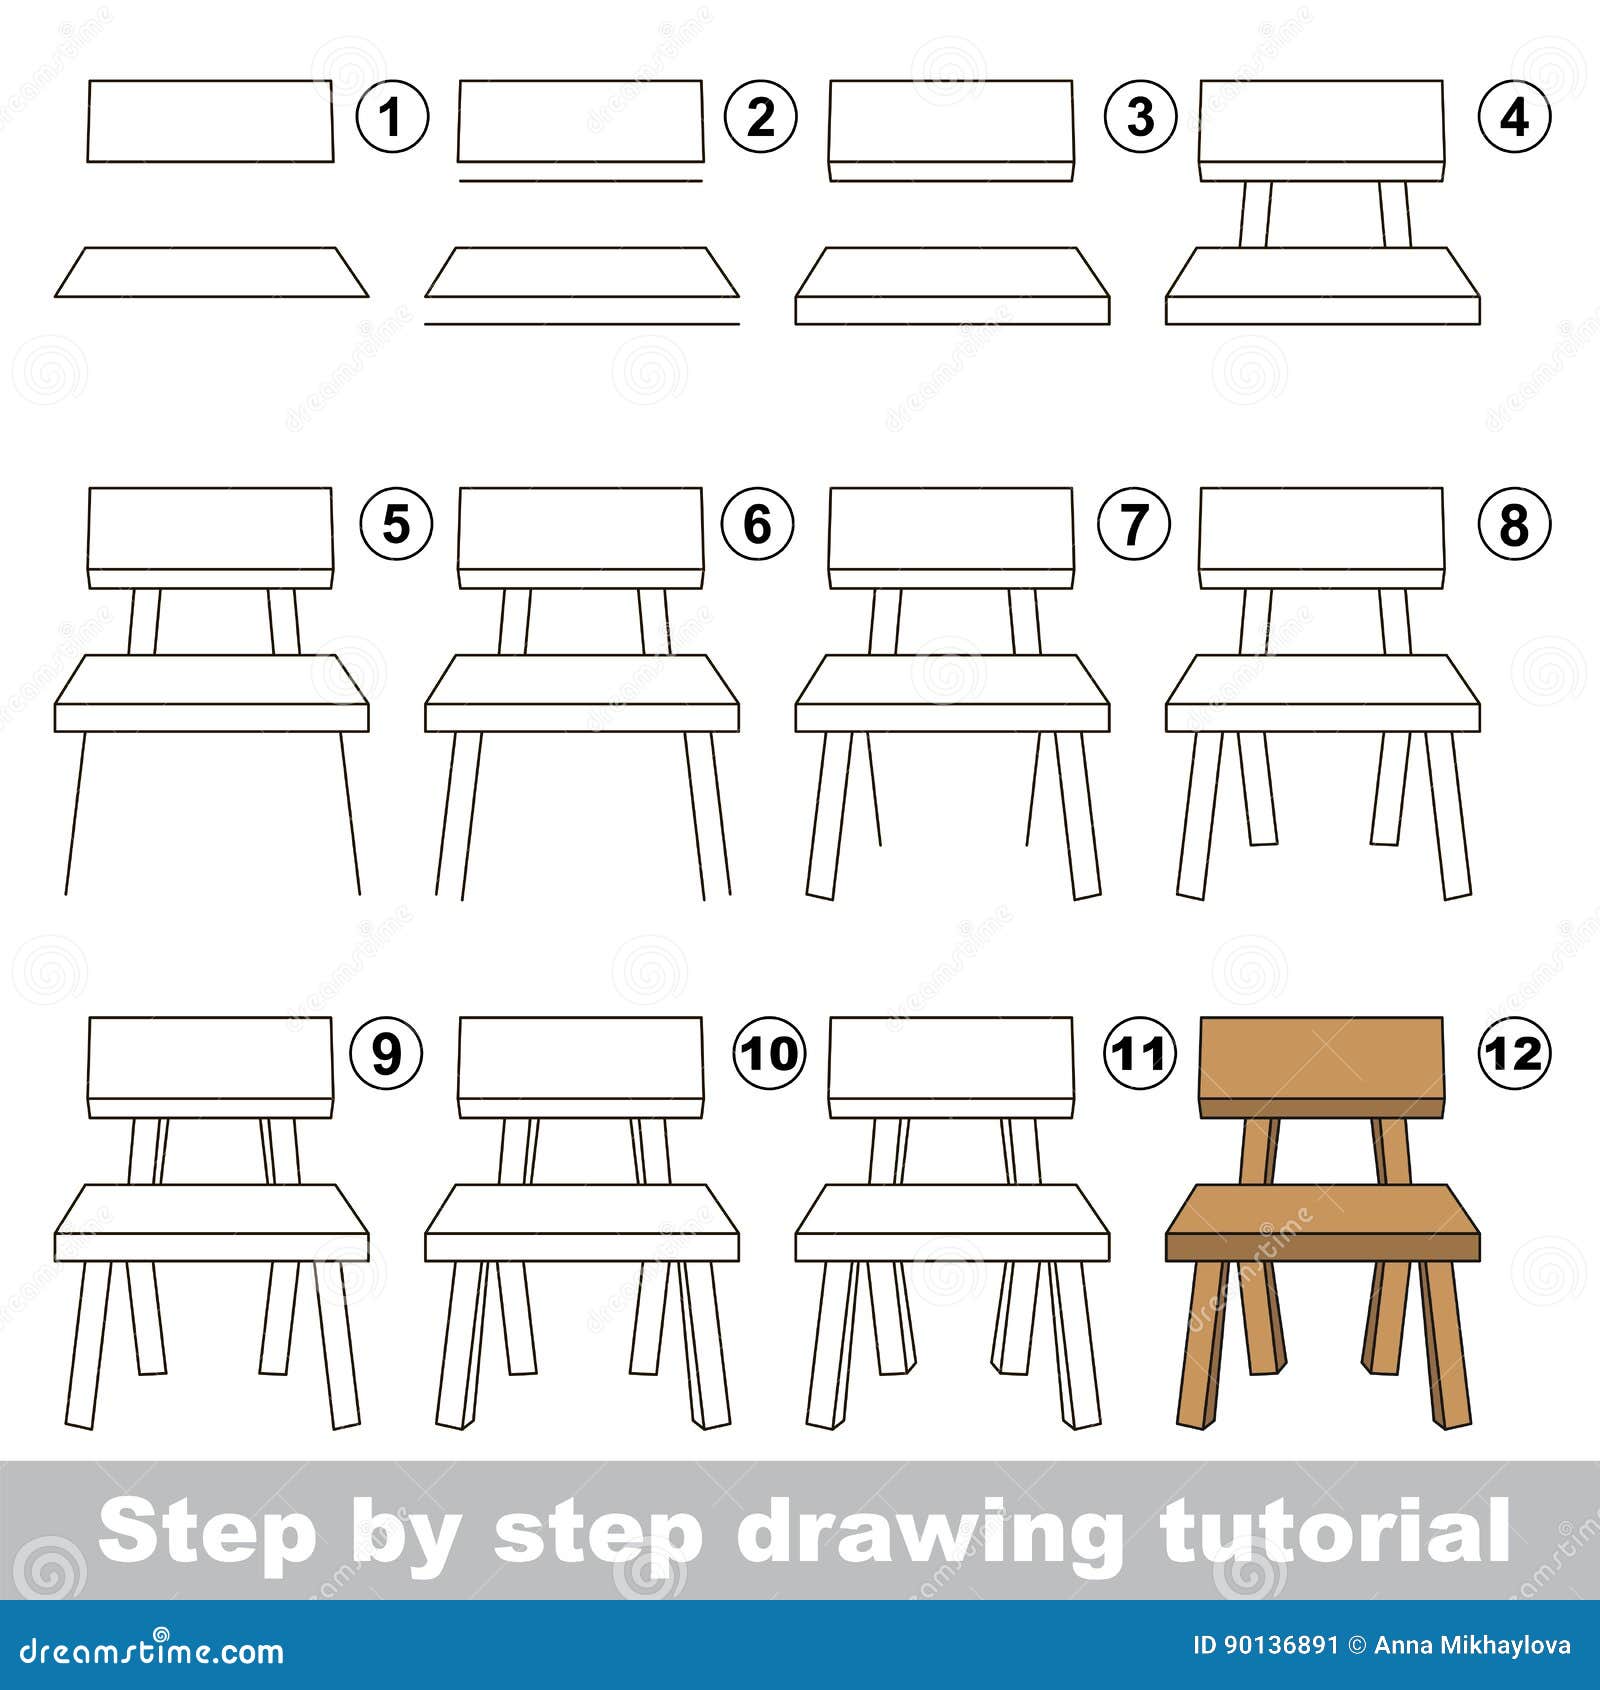 Bench Drawing Easy For Kids - How to draw a bench. - mekealarson